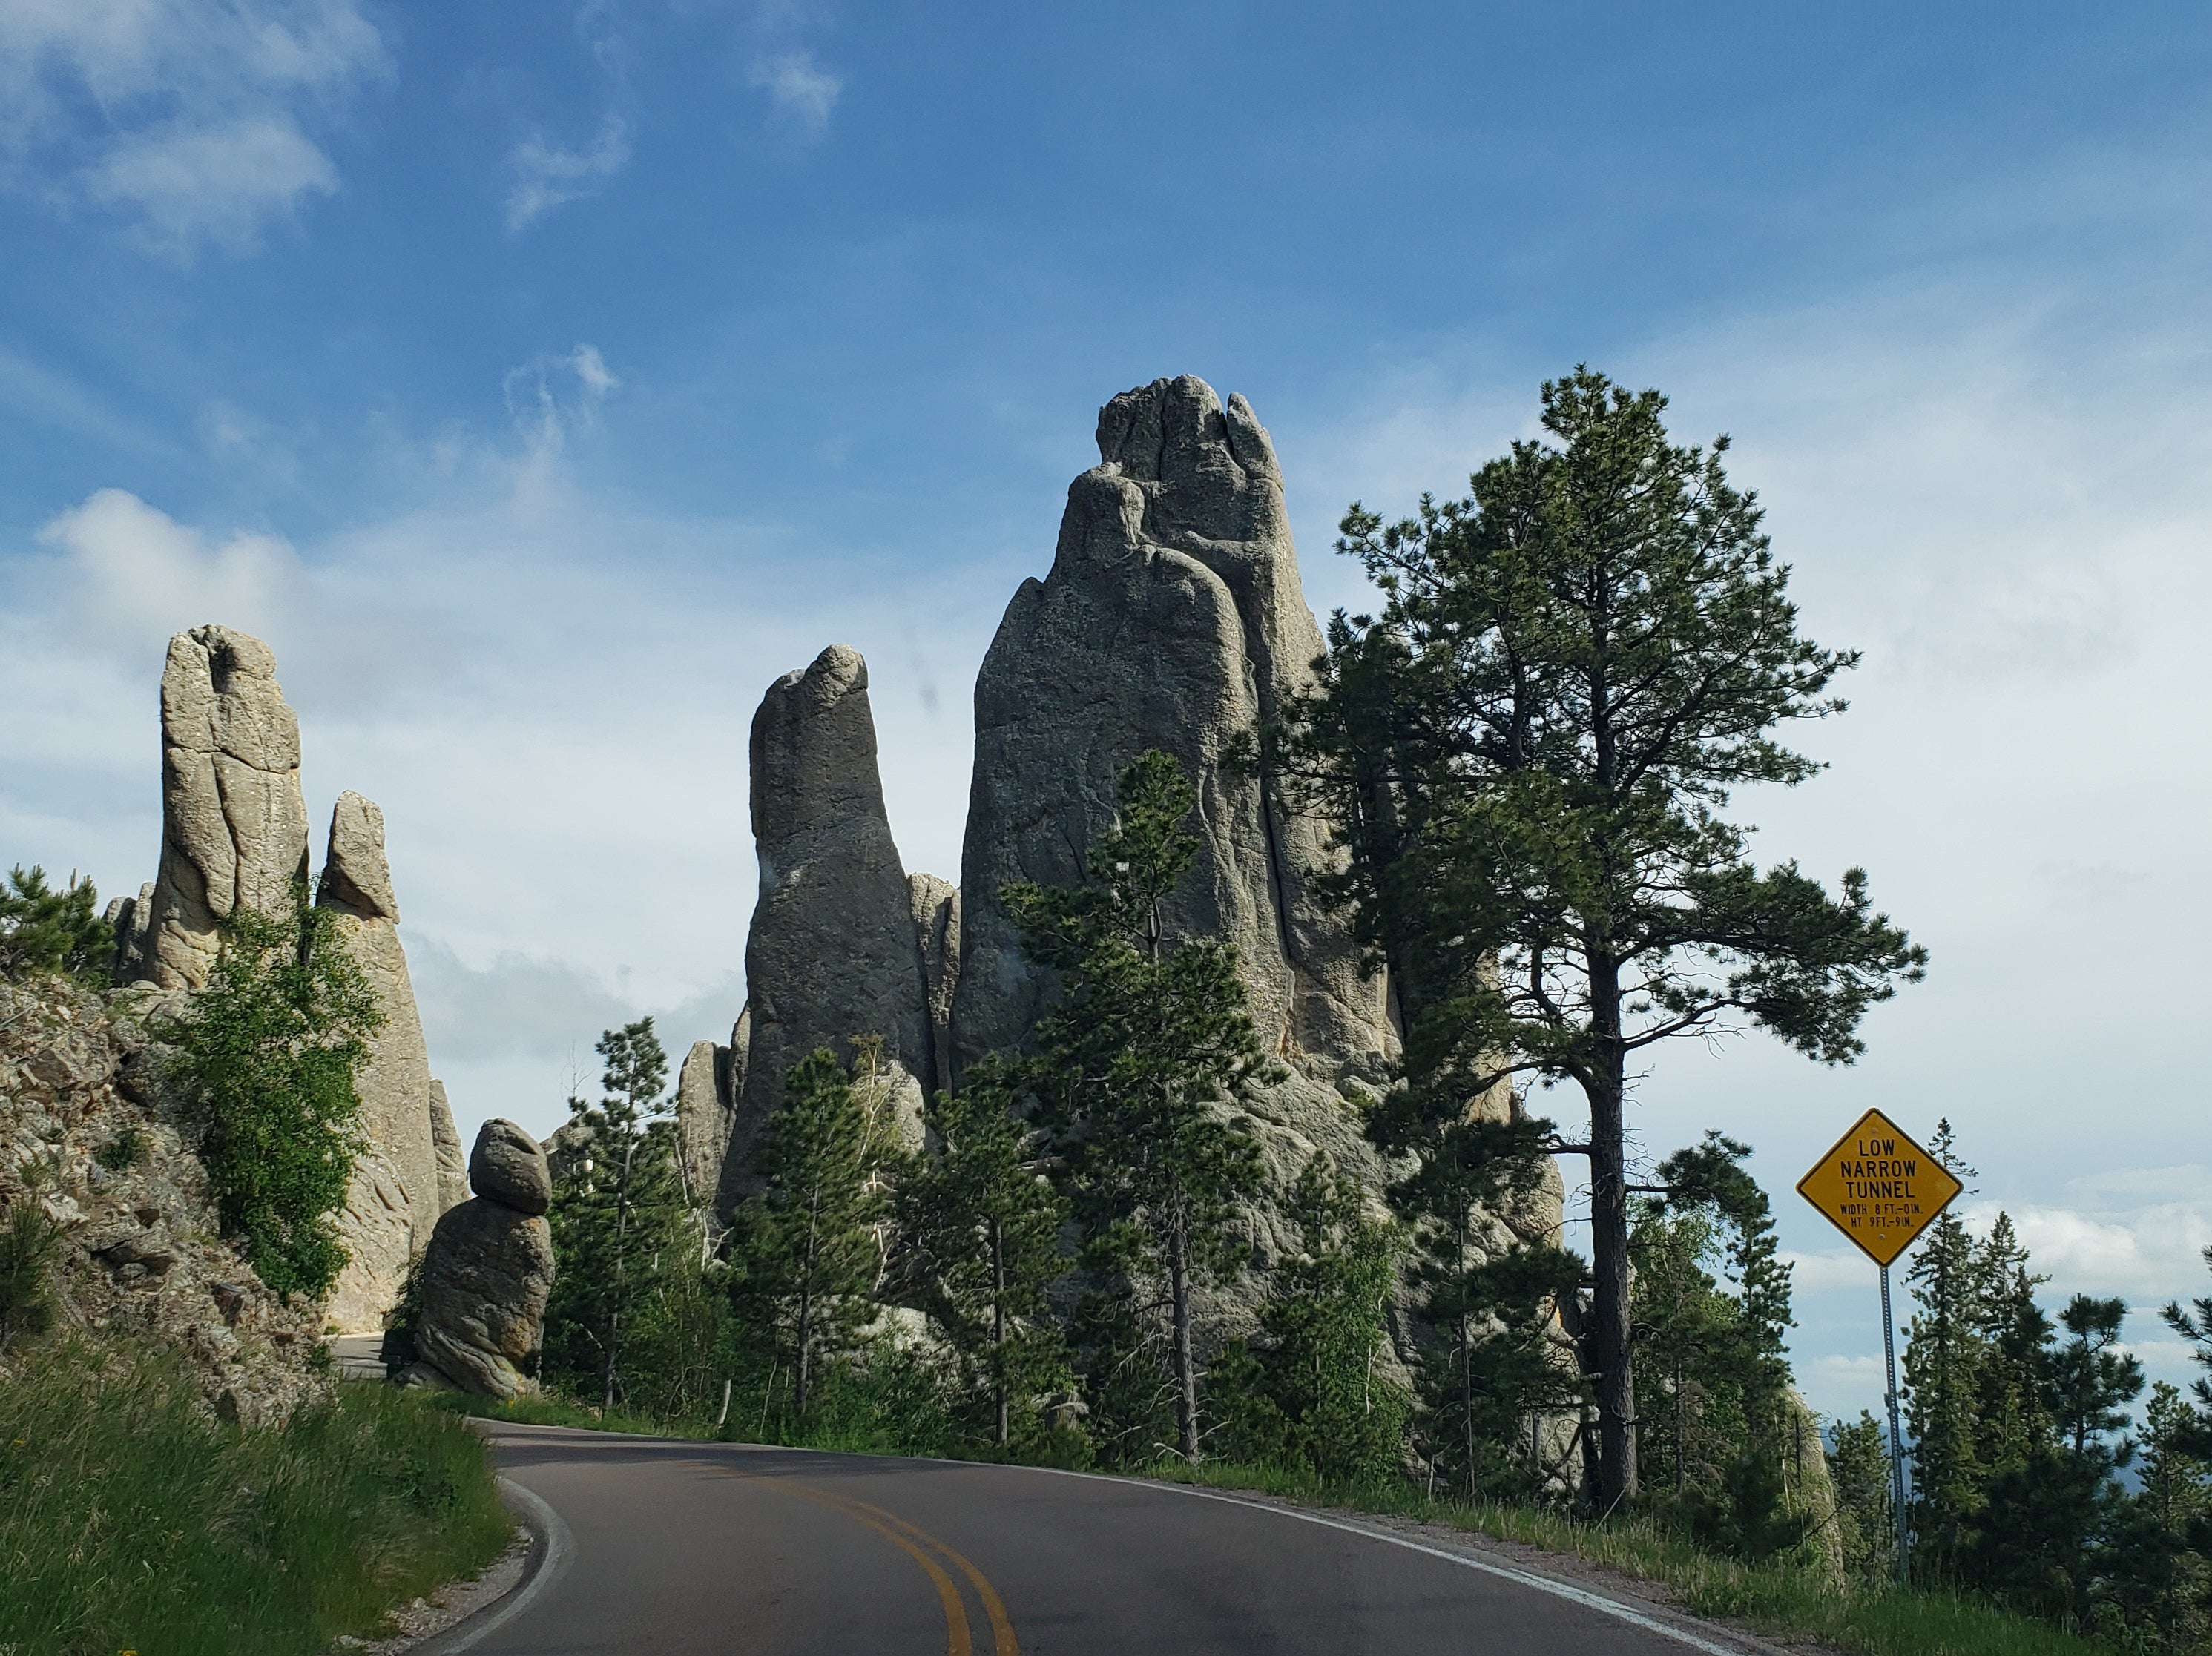 The astounding rock formations of the Needles Highway through Custer State Park, South Dakota